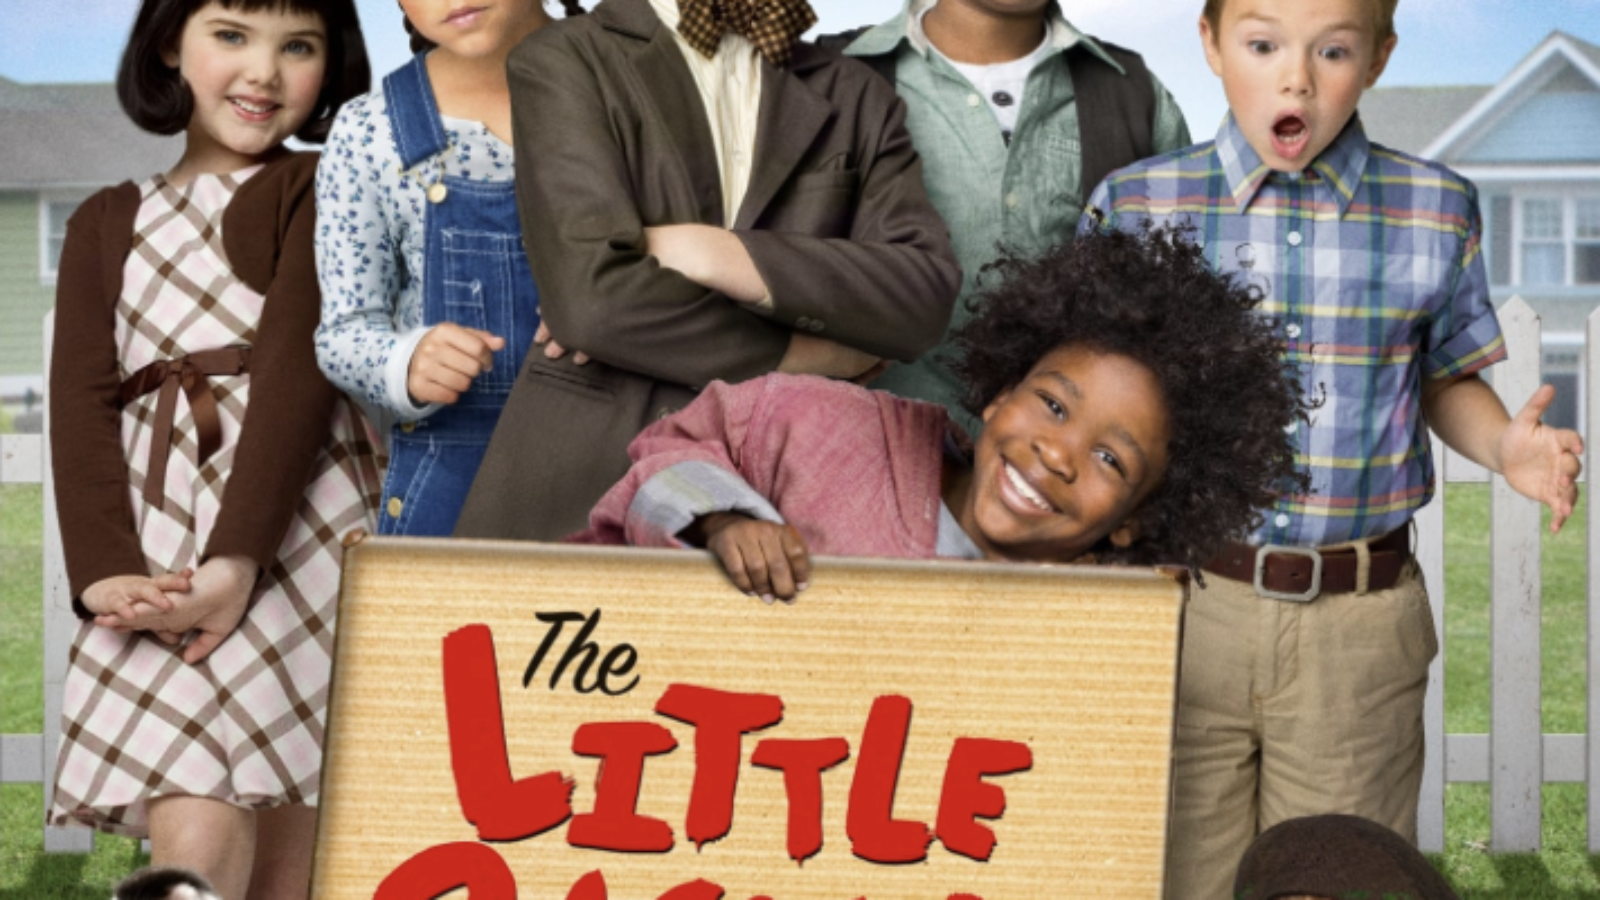 the little rascals save the date - Search.png